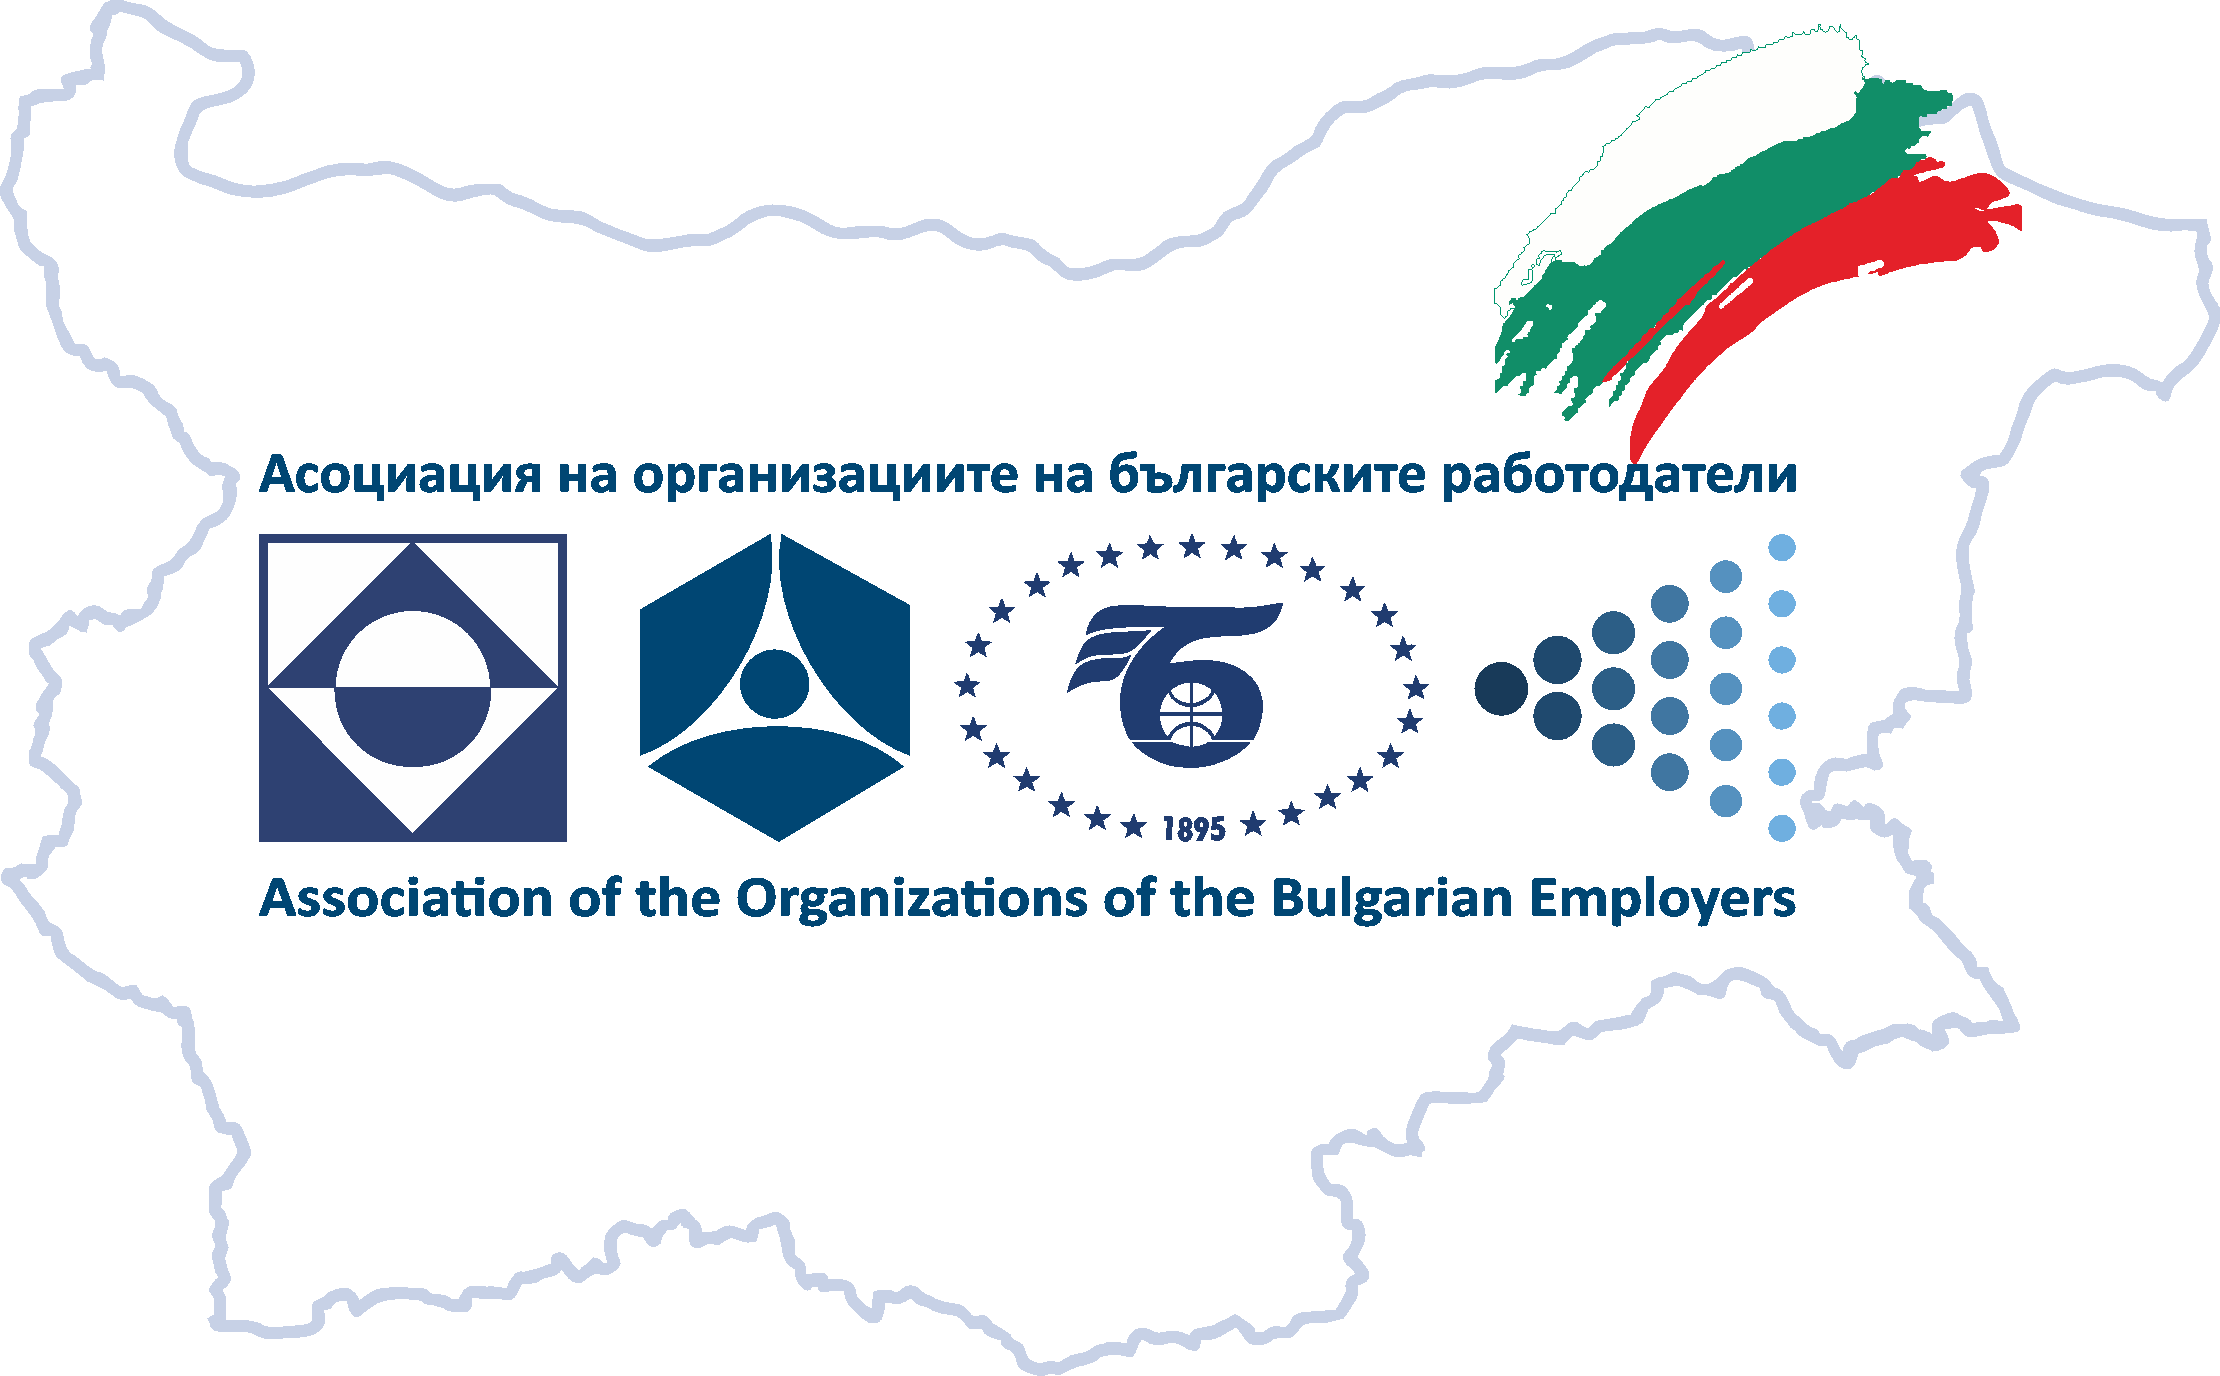 Association_of_the_Organizations_of_the_Bulgarian_Employers